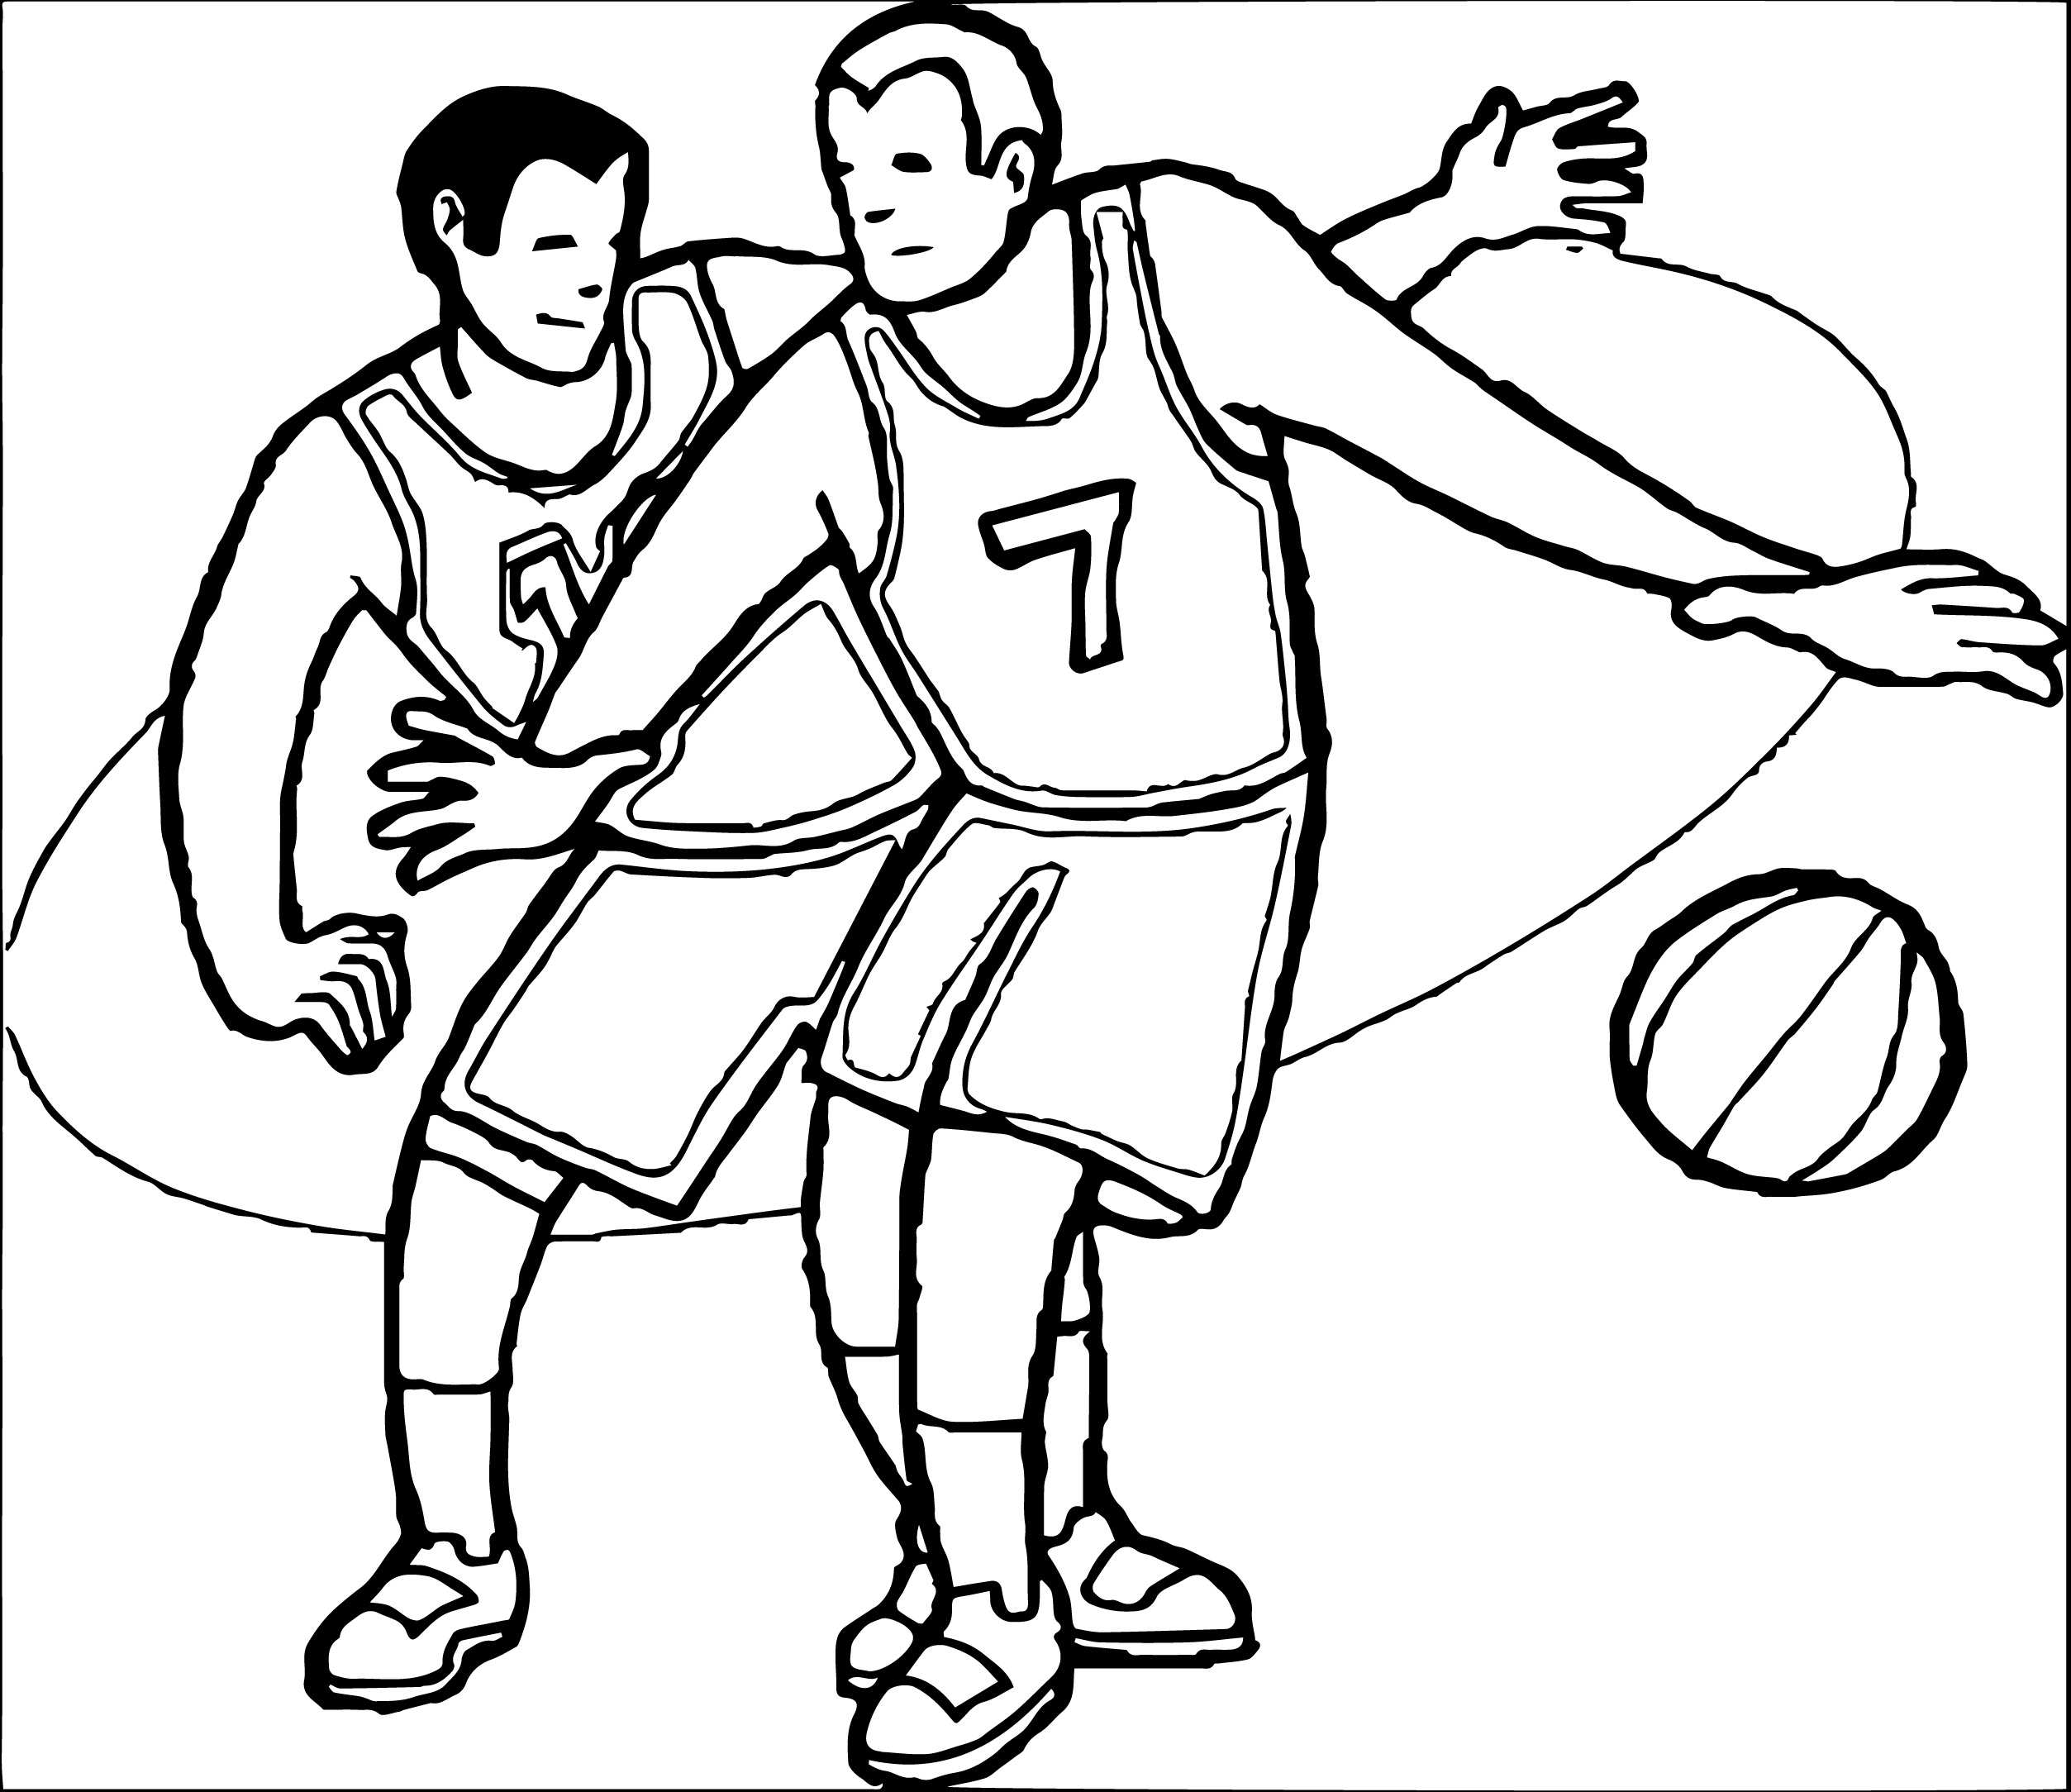 Basketball hoop clipart free images 2 